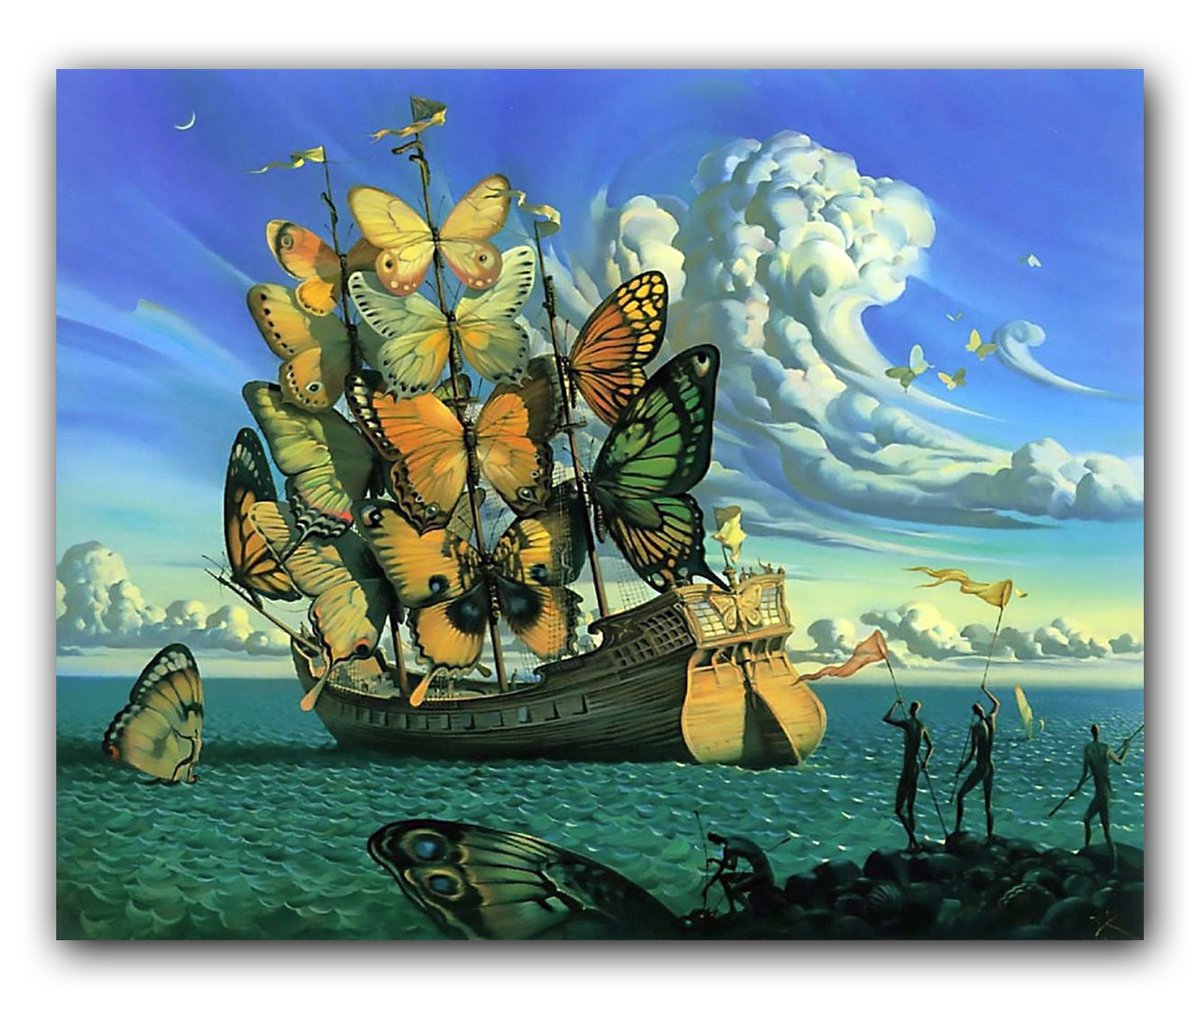 Art Inspiration For Today: A Week of Art by Salvador Dalí
Ship with Butterfly Sails by Salvador Dali (Spanish (1904-1989), oil on canvas, genre: Surrealism, 1937 #shipwithbutterflysails #salvadordali #artinspiration #oilpainting #fineart #surrealism #artonx #pohoartist